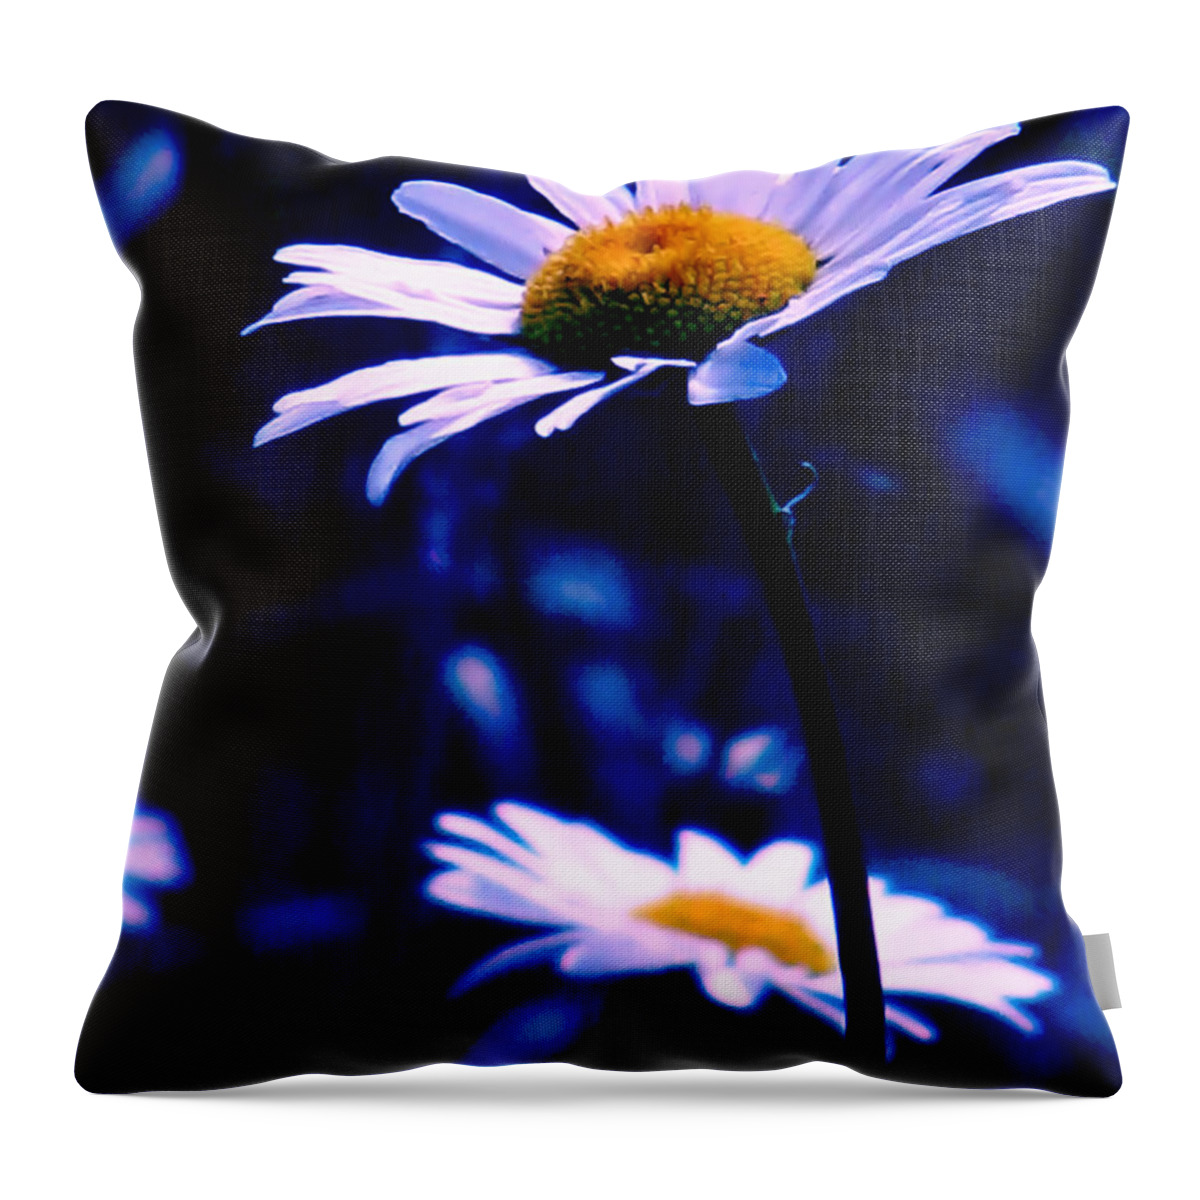 Nature Throw Pillow featuring the photograph Daisies In The Blue Realm by Rory Siegel